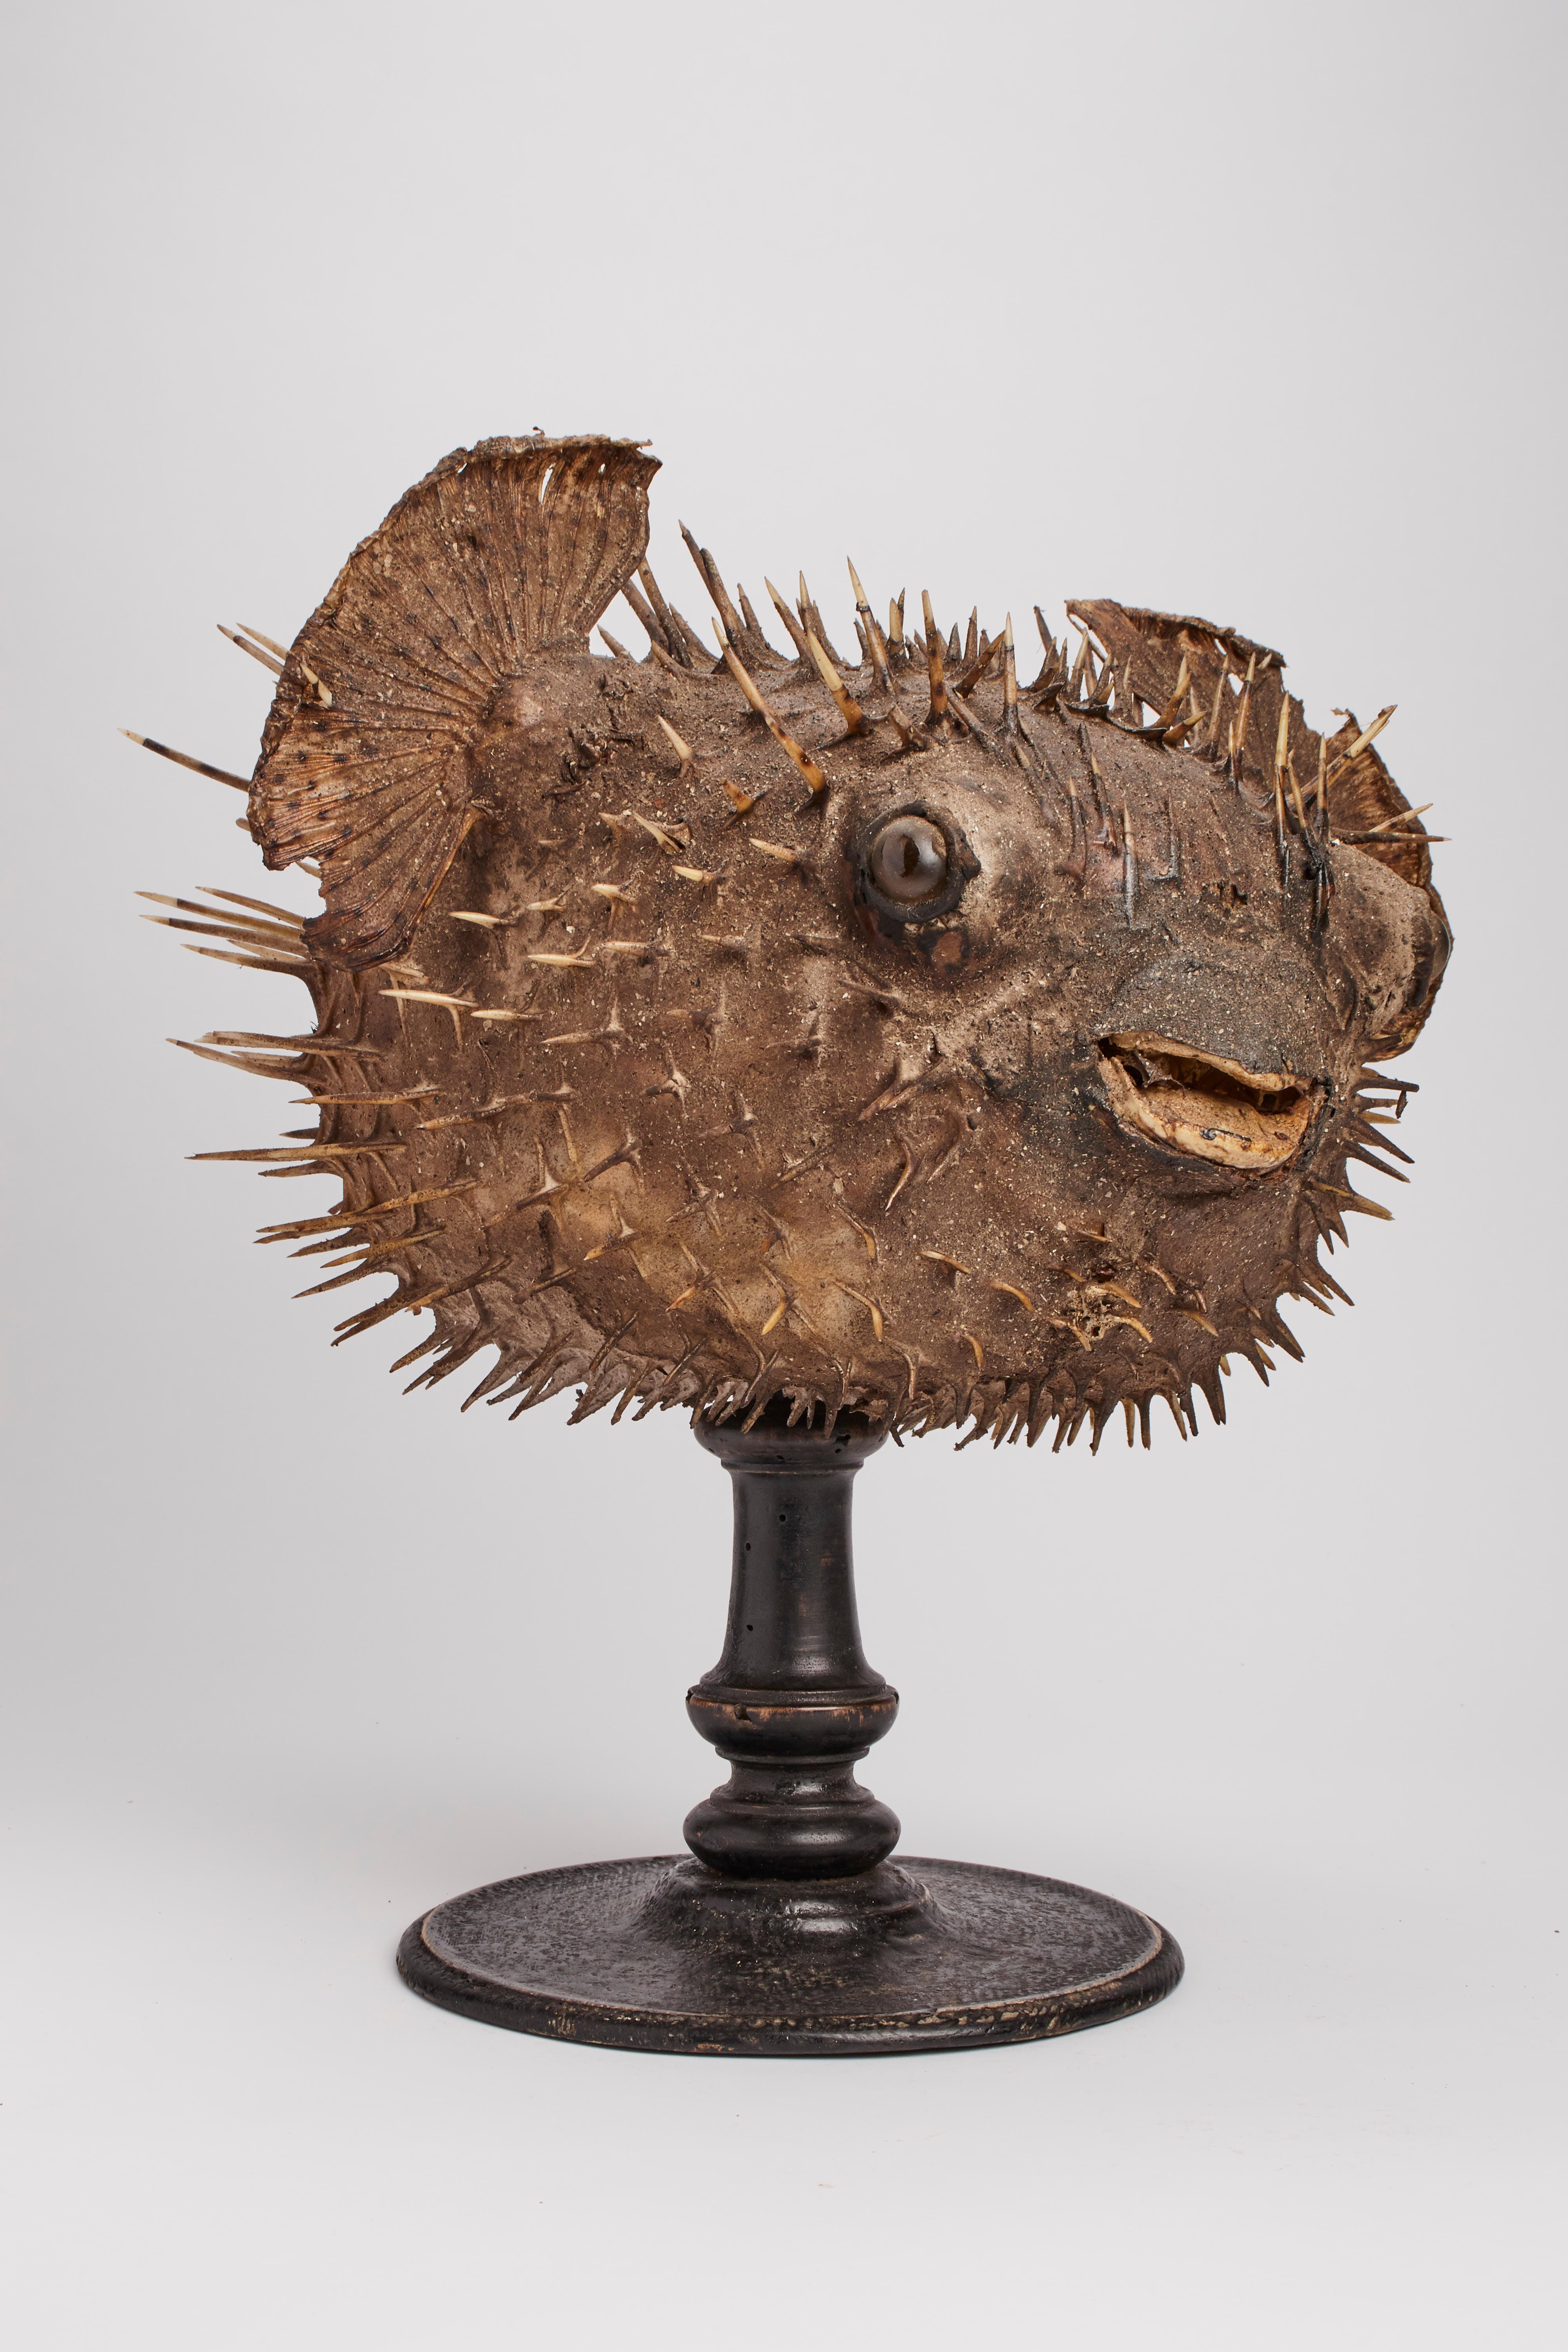 Taxidermy marine natural Wunderkammer specimen, the common porcupinefish (Tetrodon Cutcutia). The Specimen is stuffed and mounted over around a dark wooden base. Sulfur glass eyes, Italy, circa1880.